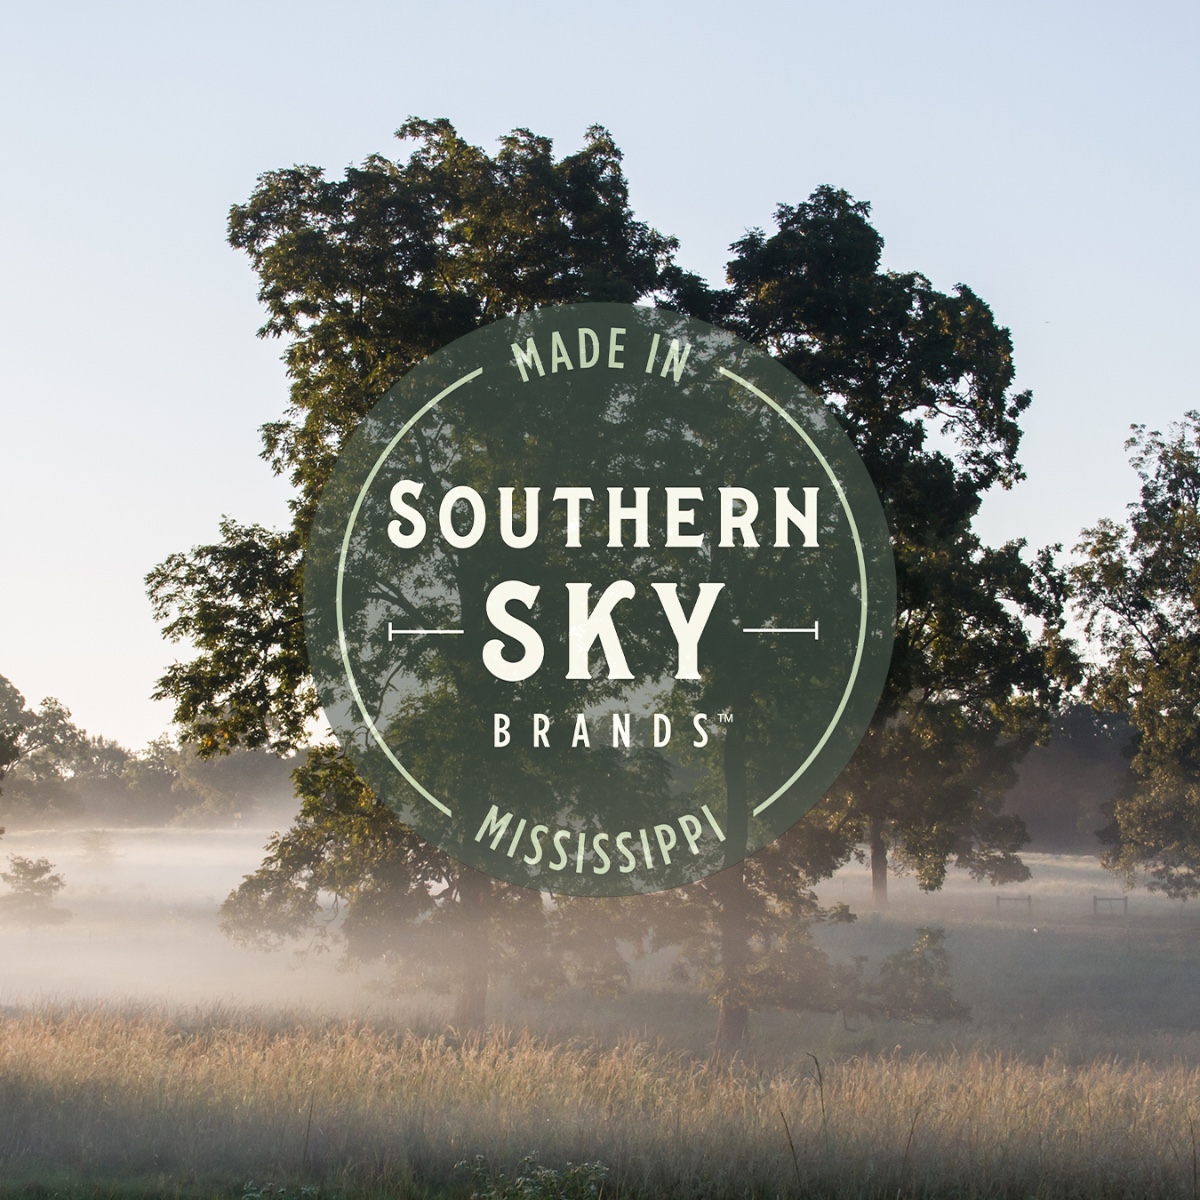 Made only in The Magnolia State.

#magnoliastate #southernskybrands